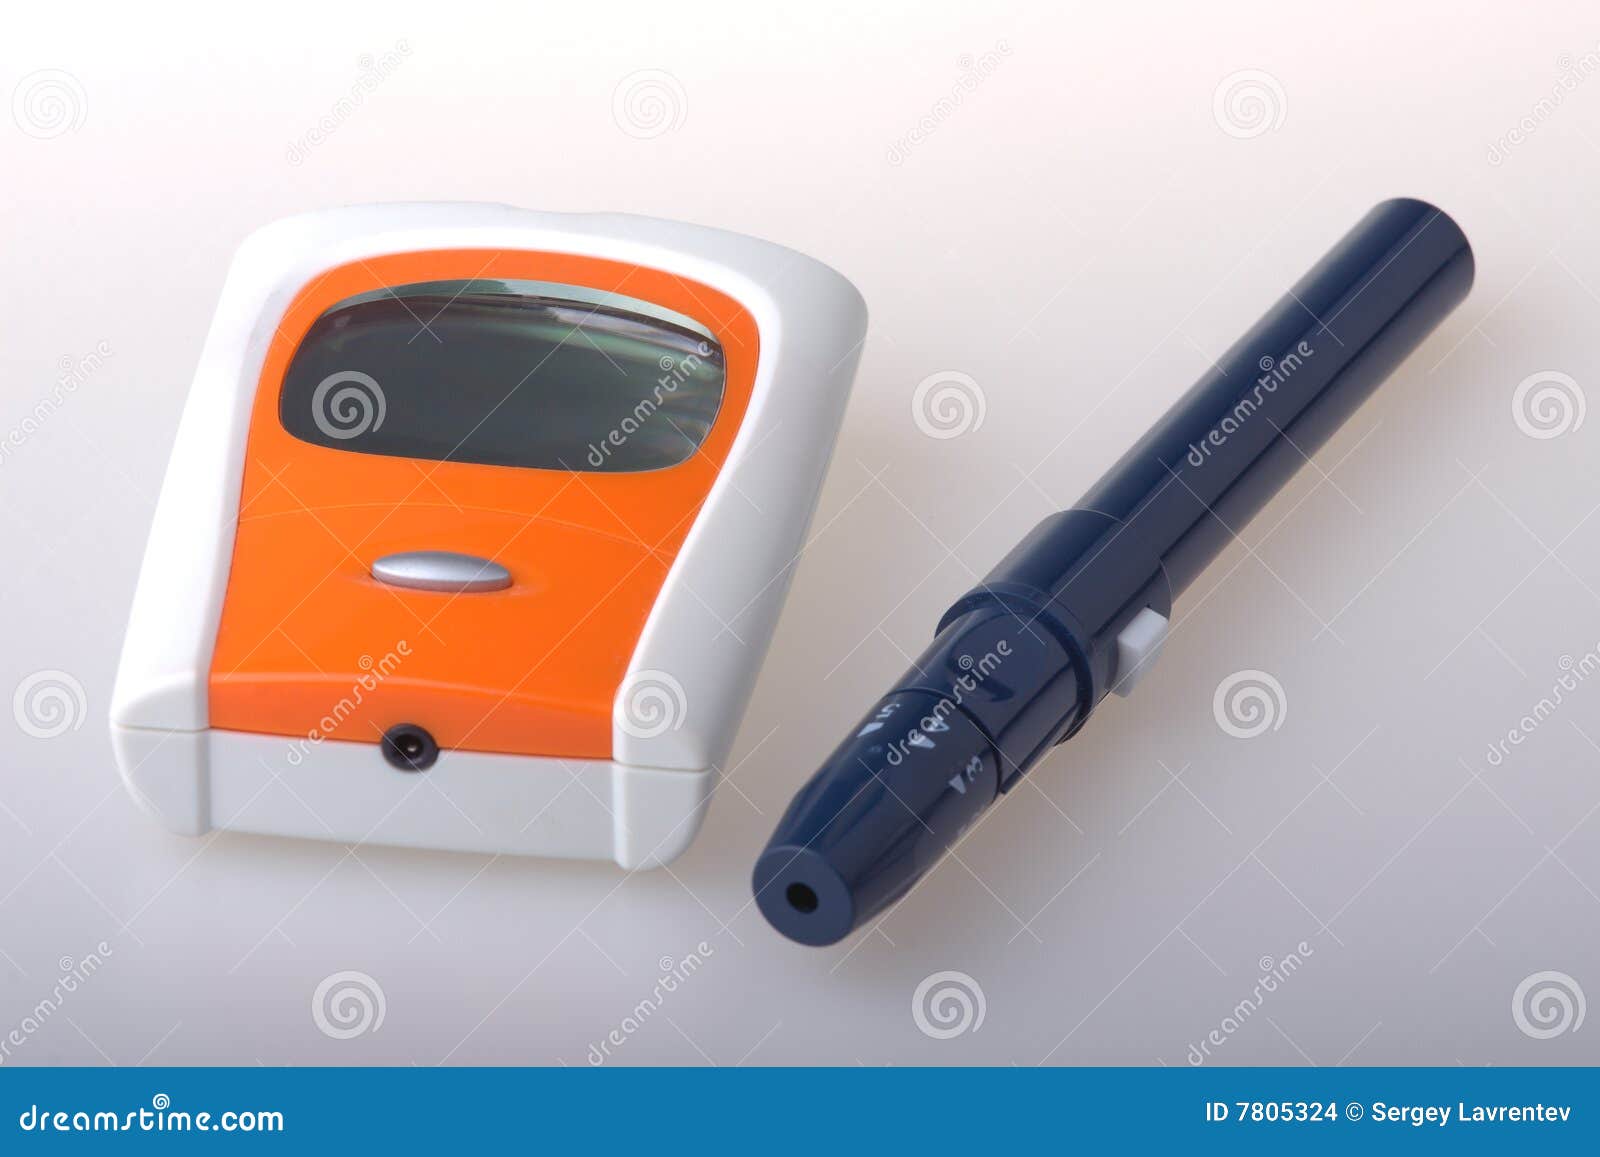 clipart blood glucose monitor - photo #43